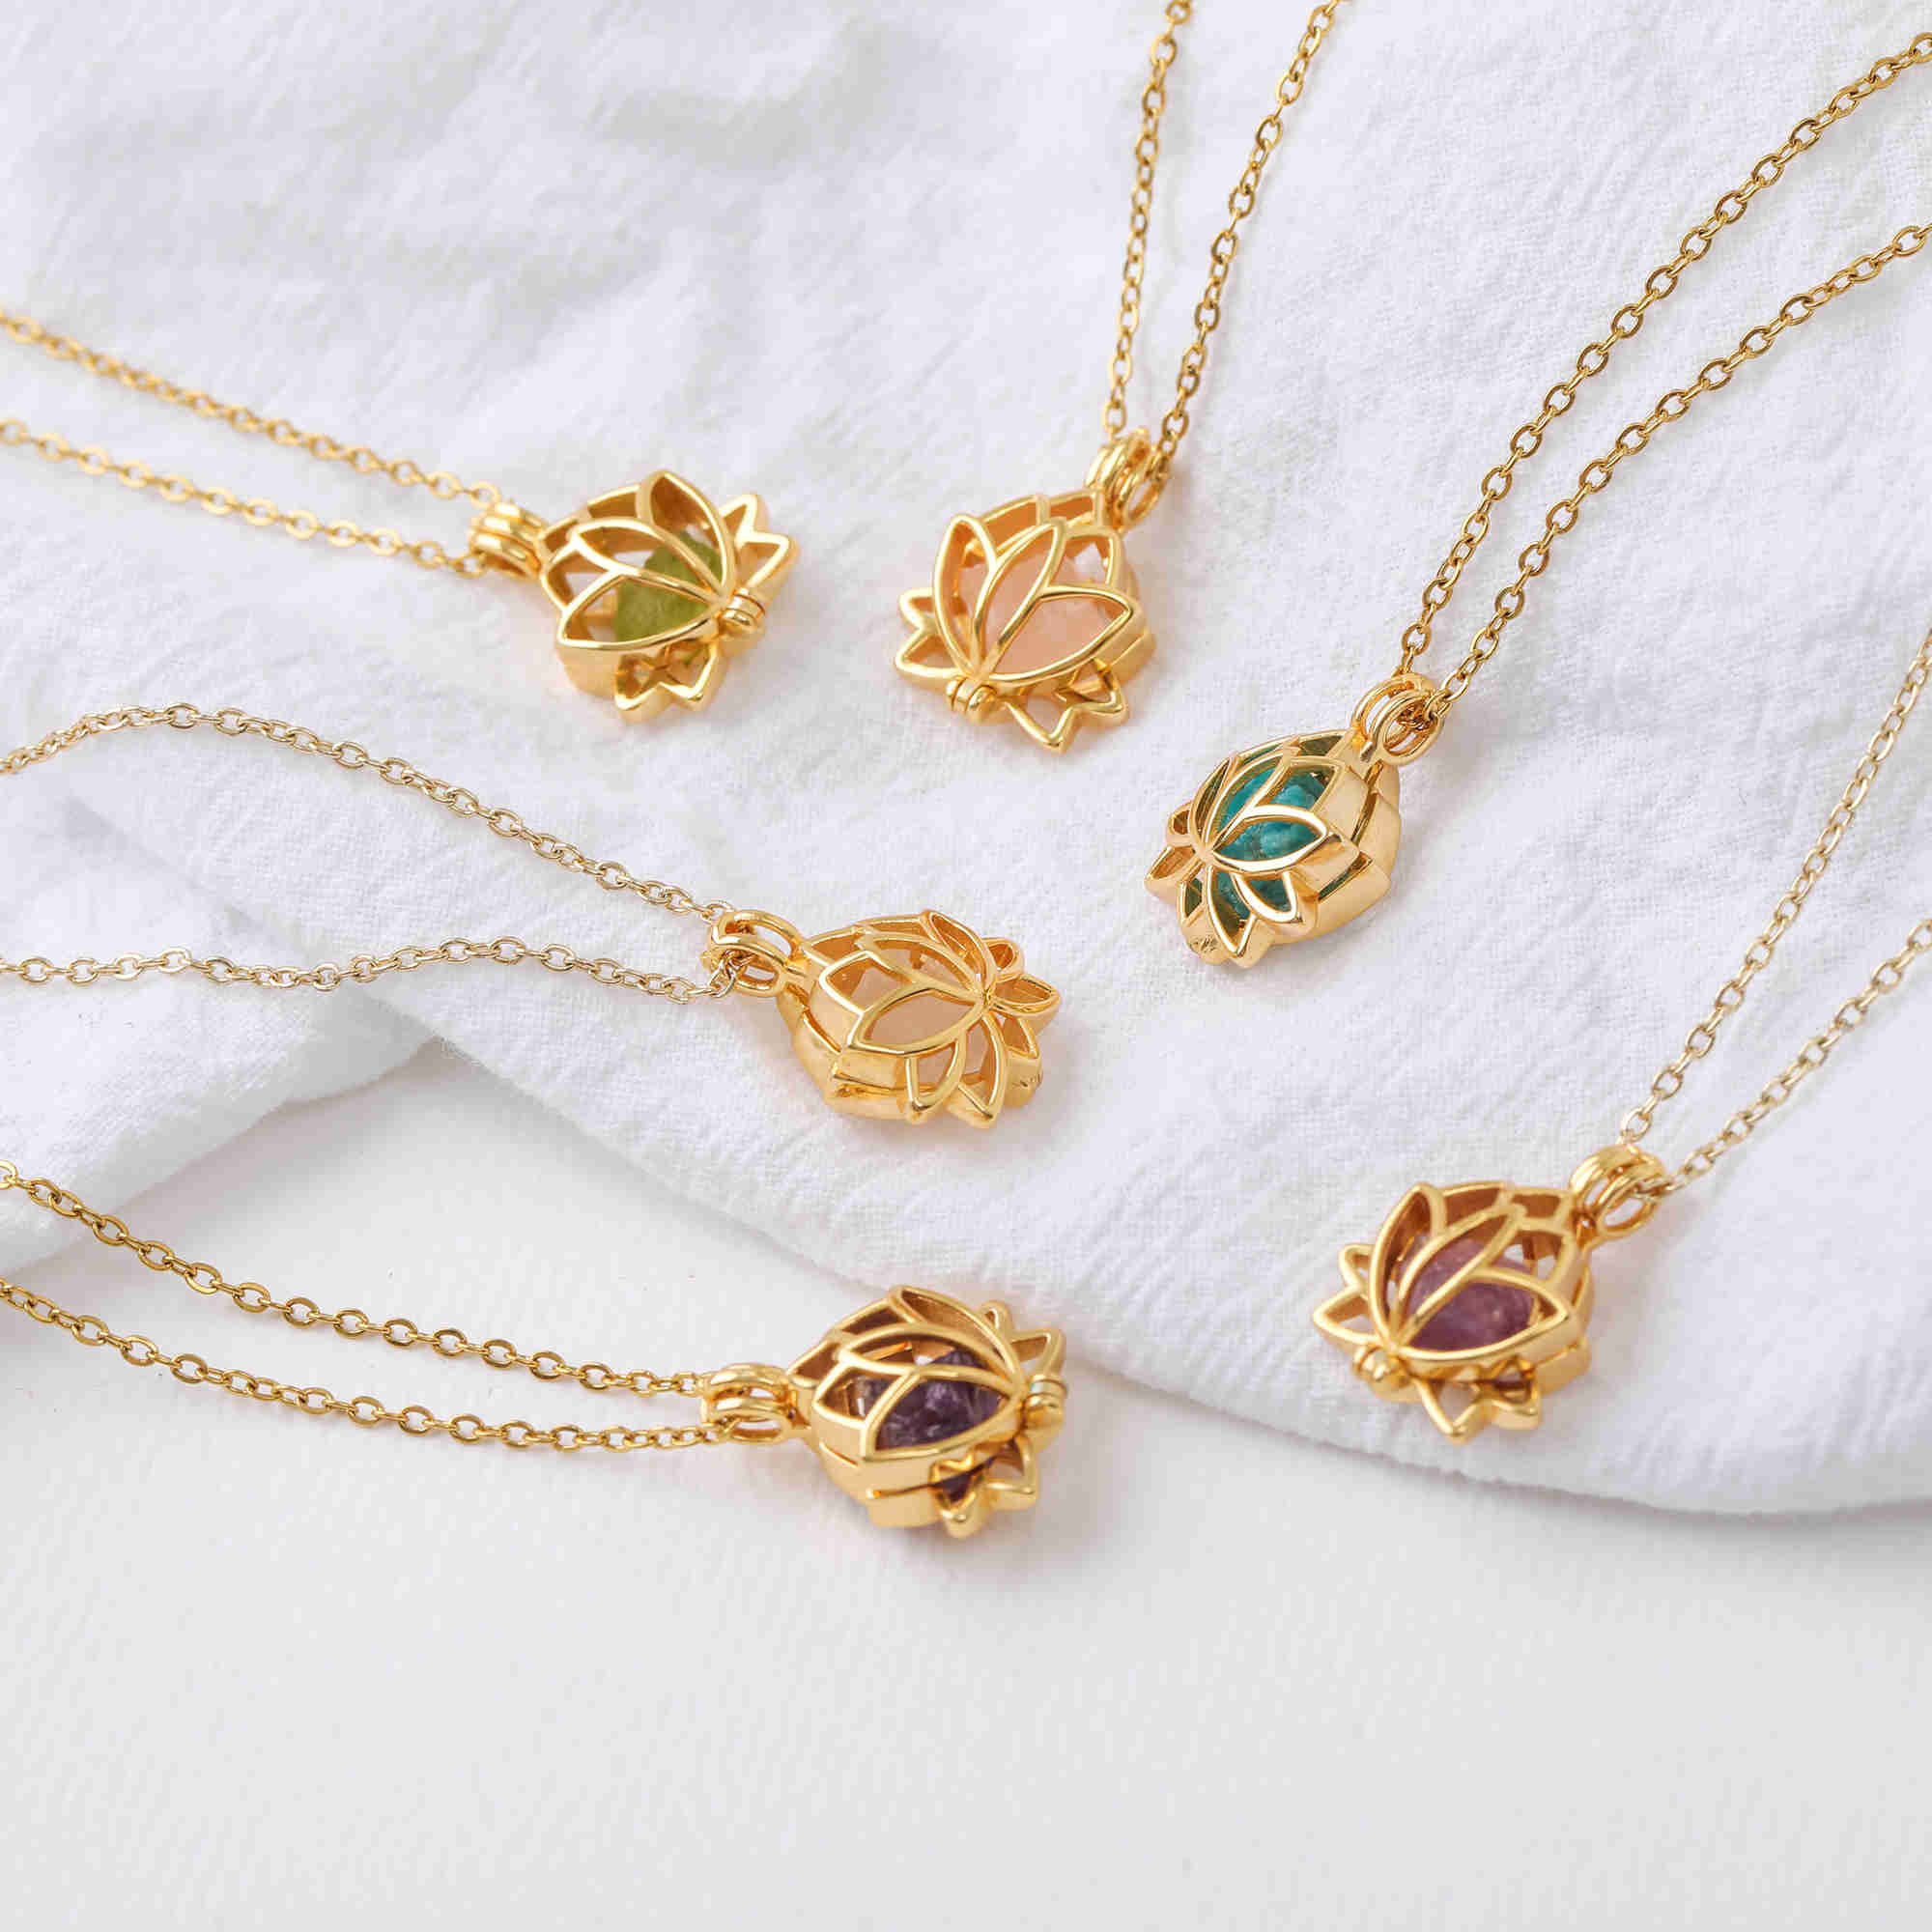 16" Gold Plated Hollow Lotus With Natural Raw Crystal Necklace, Birthstone Necklace, Gemstone Necklace Jewelry BT011